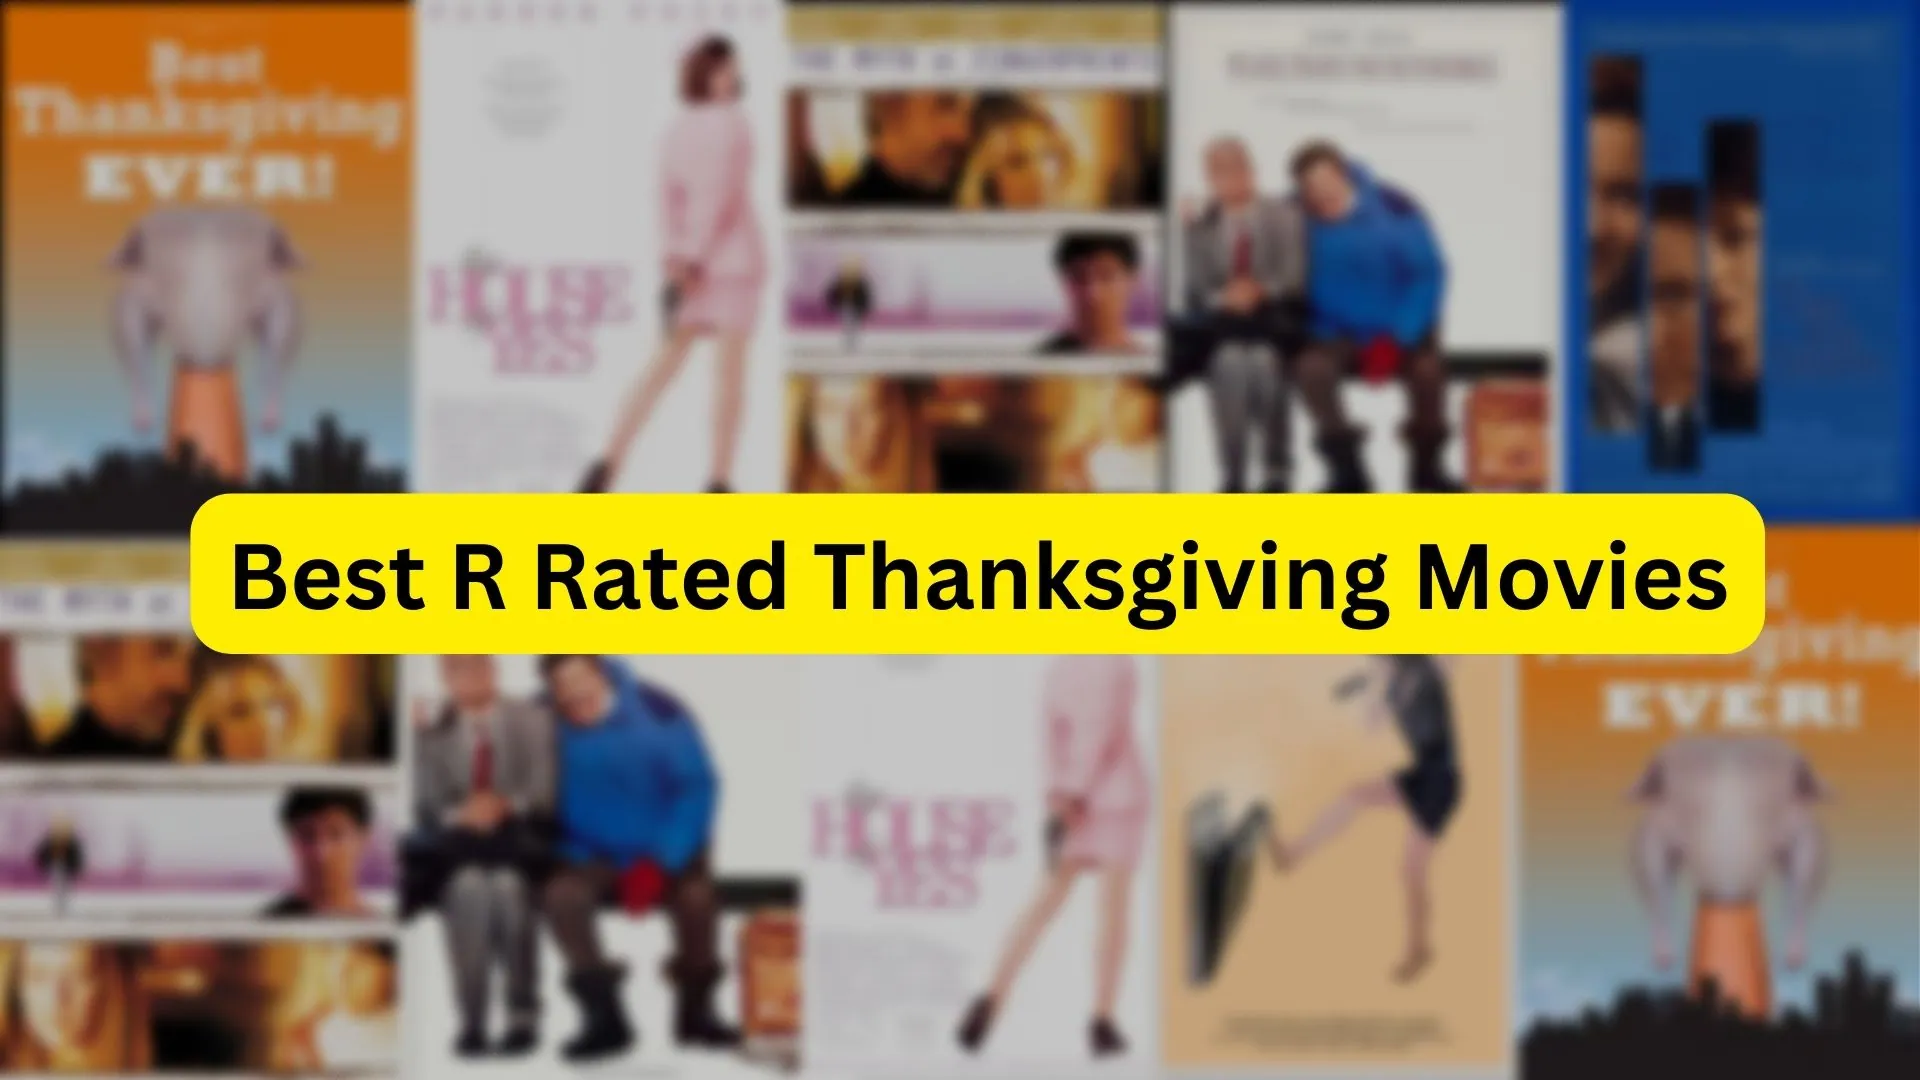 Best R Rated Thanksgiving Movies